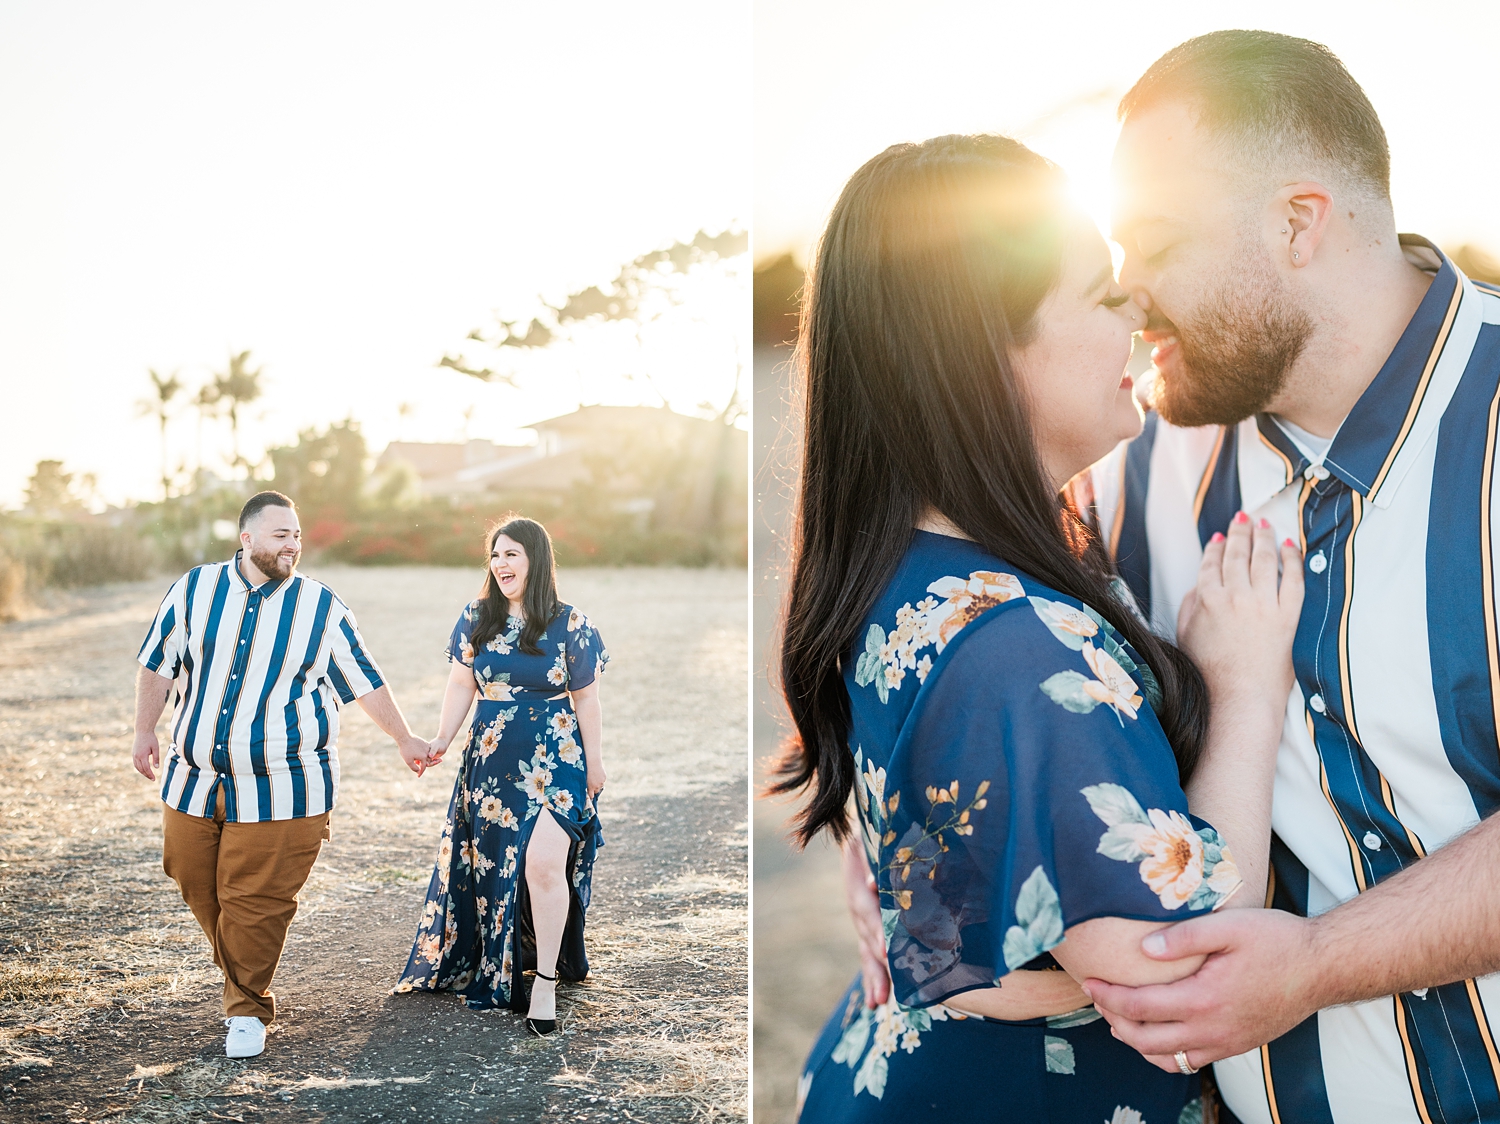 Beach Cliffs Engagement Session at Sunset | Nataly Hernandez Photography | Edwin and Susana-60.jpg